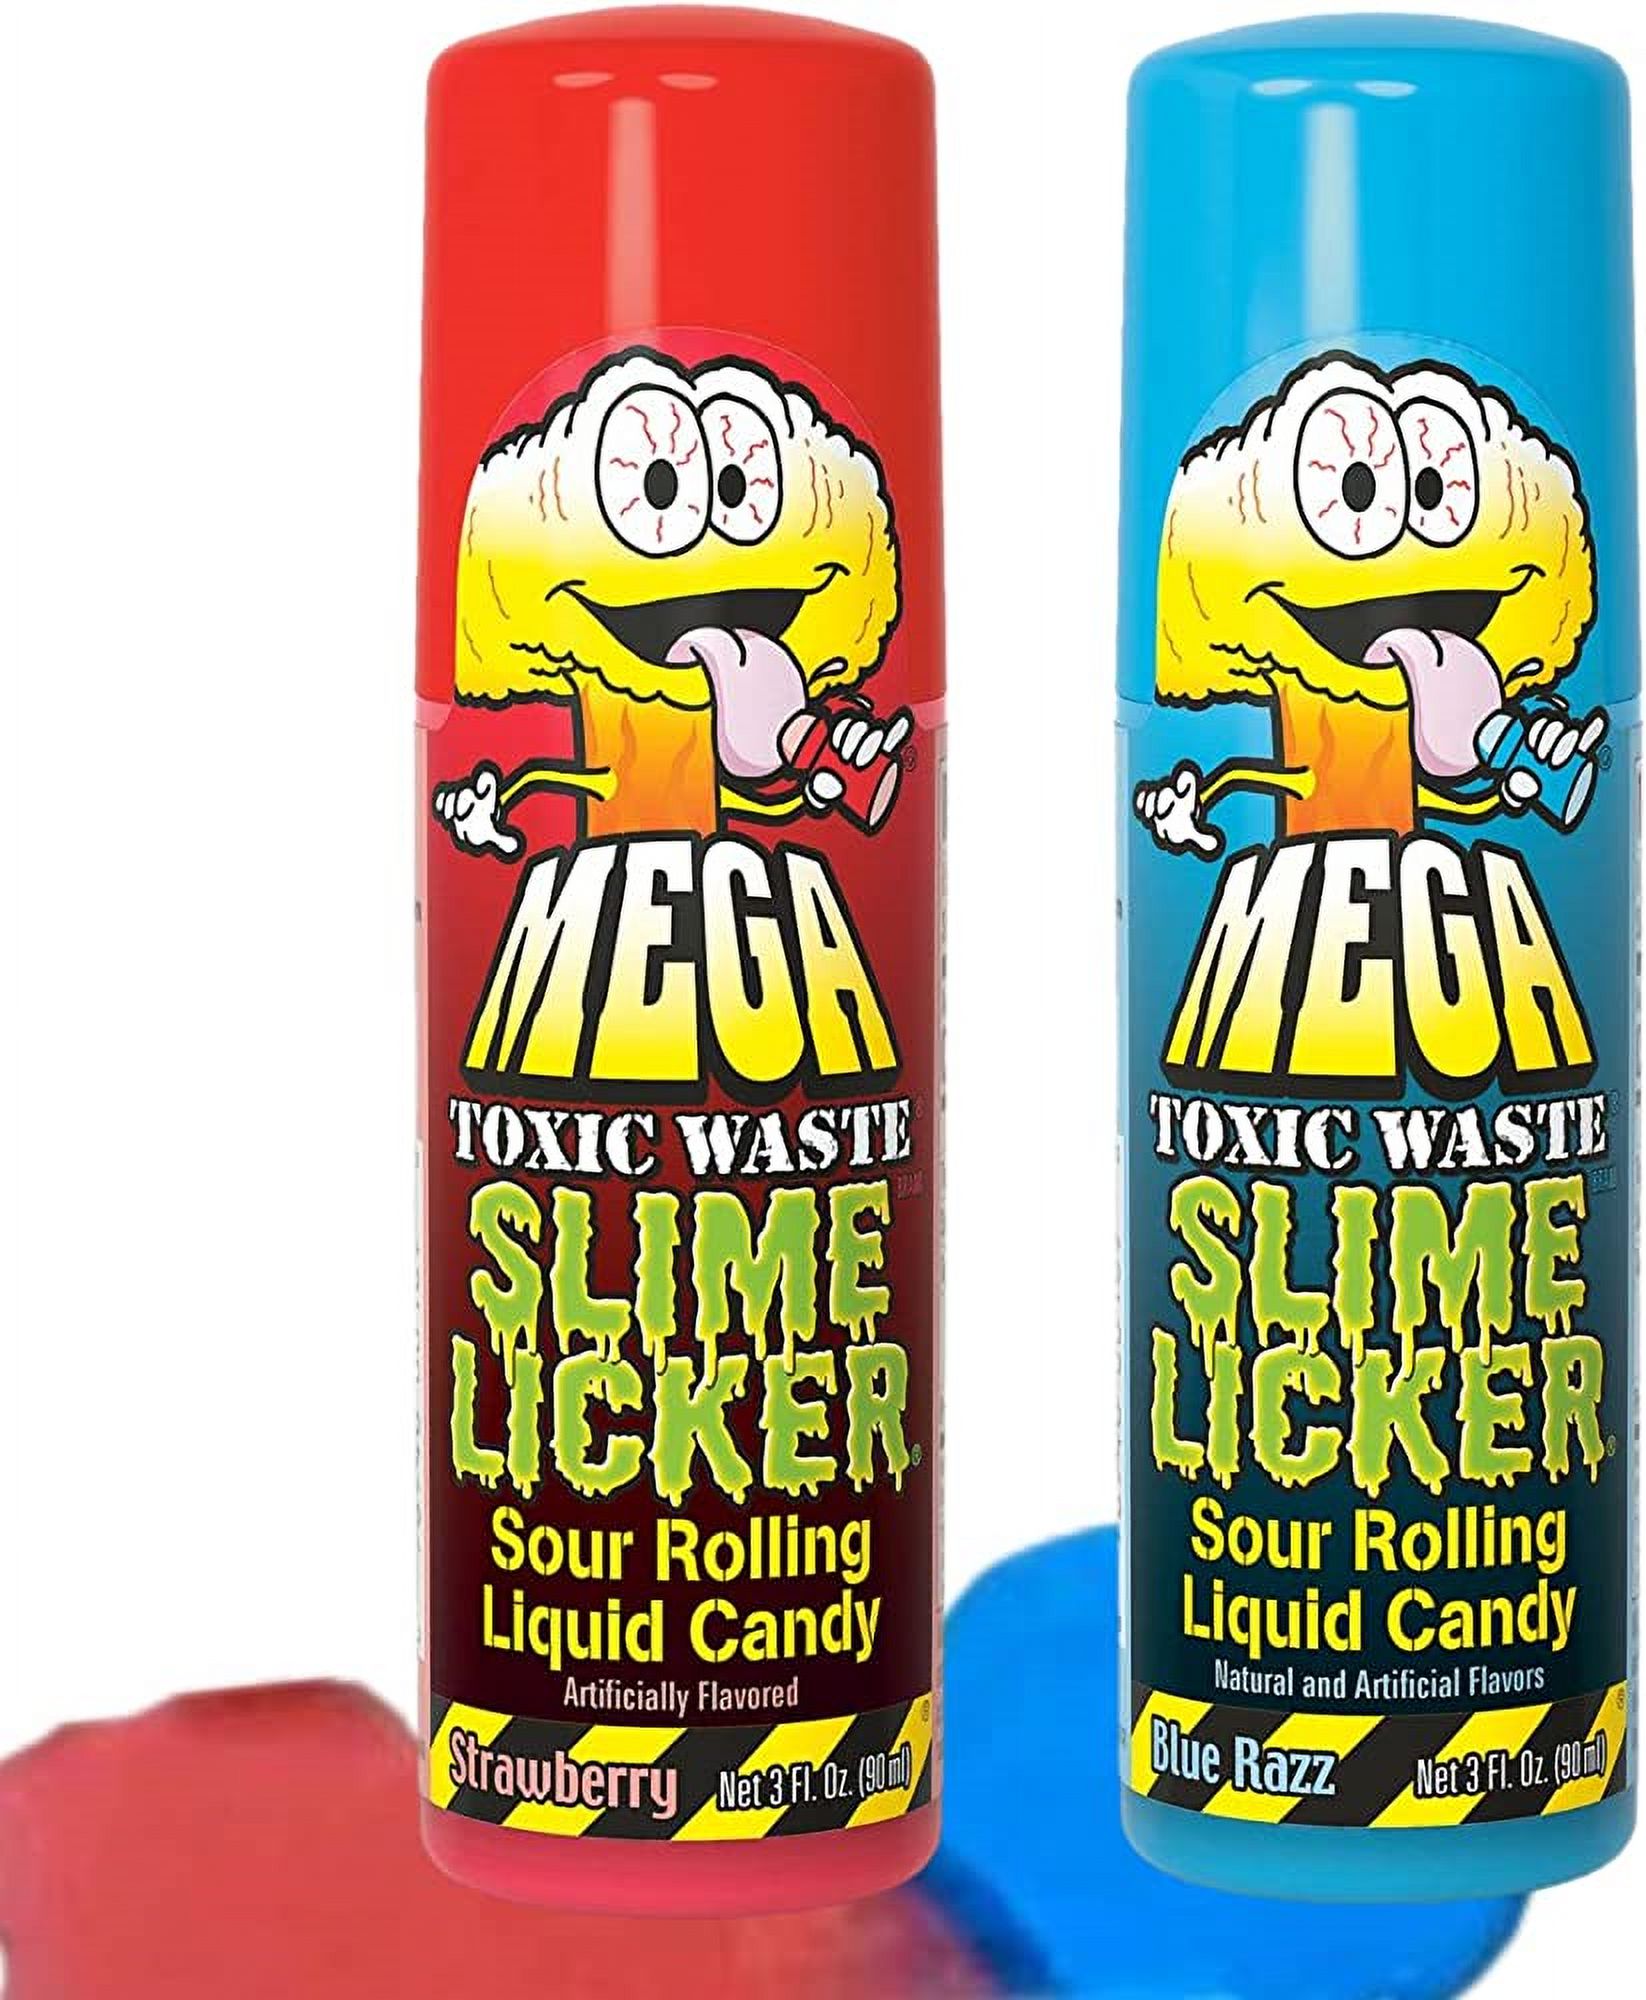 Toxic Waste Slime Licker Sour Mega Rolling Liquid Candy, Variety 2-Pack 3  oz. 